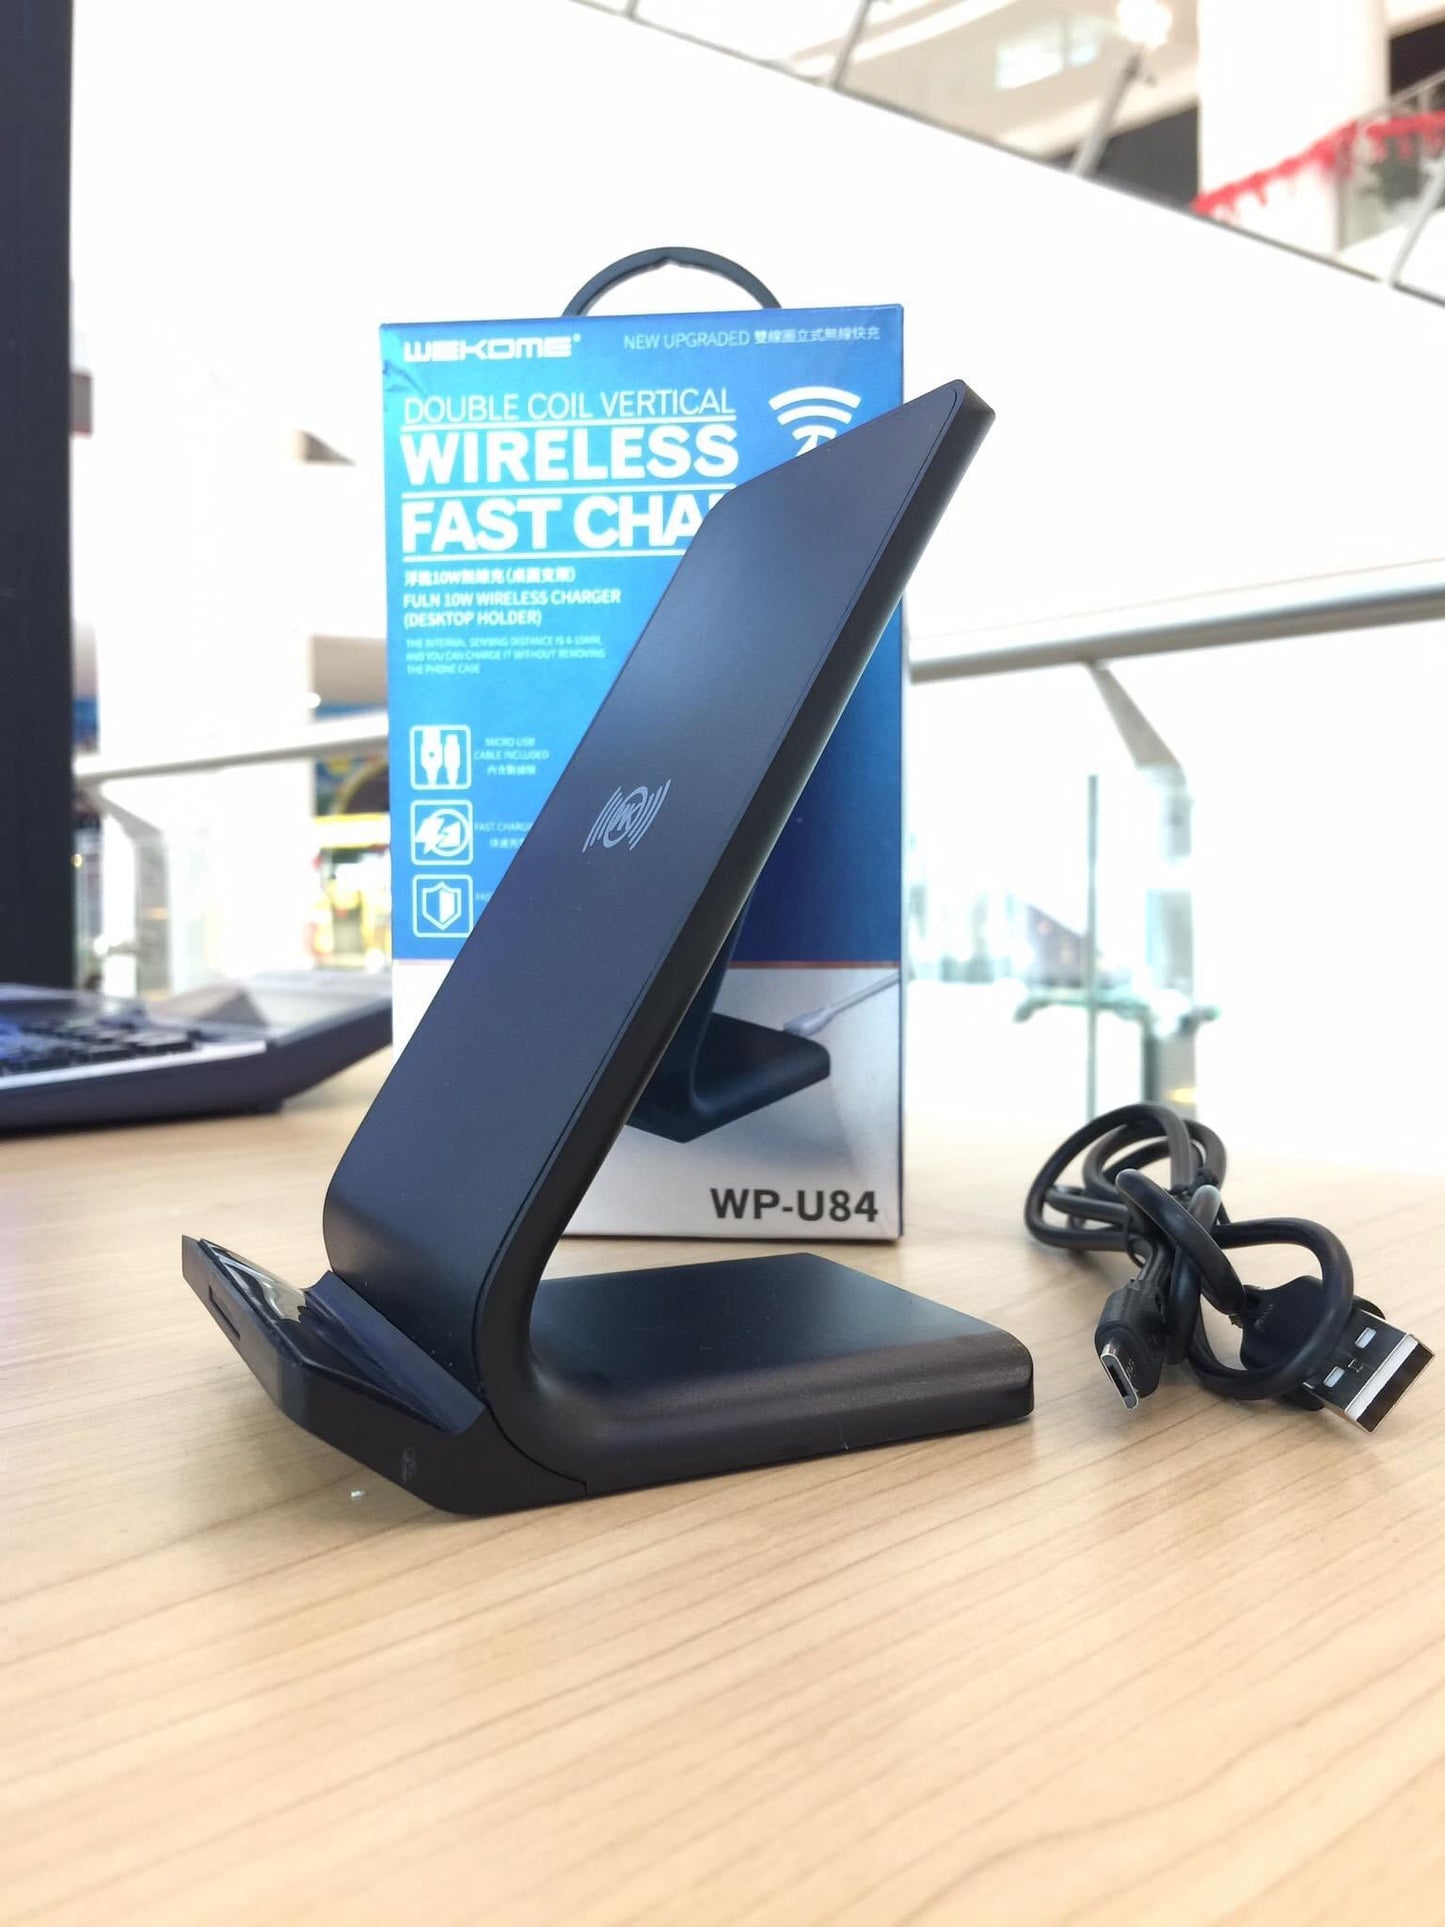 WP-U84 Double Coil Vertical Wireless Fast Charger